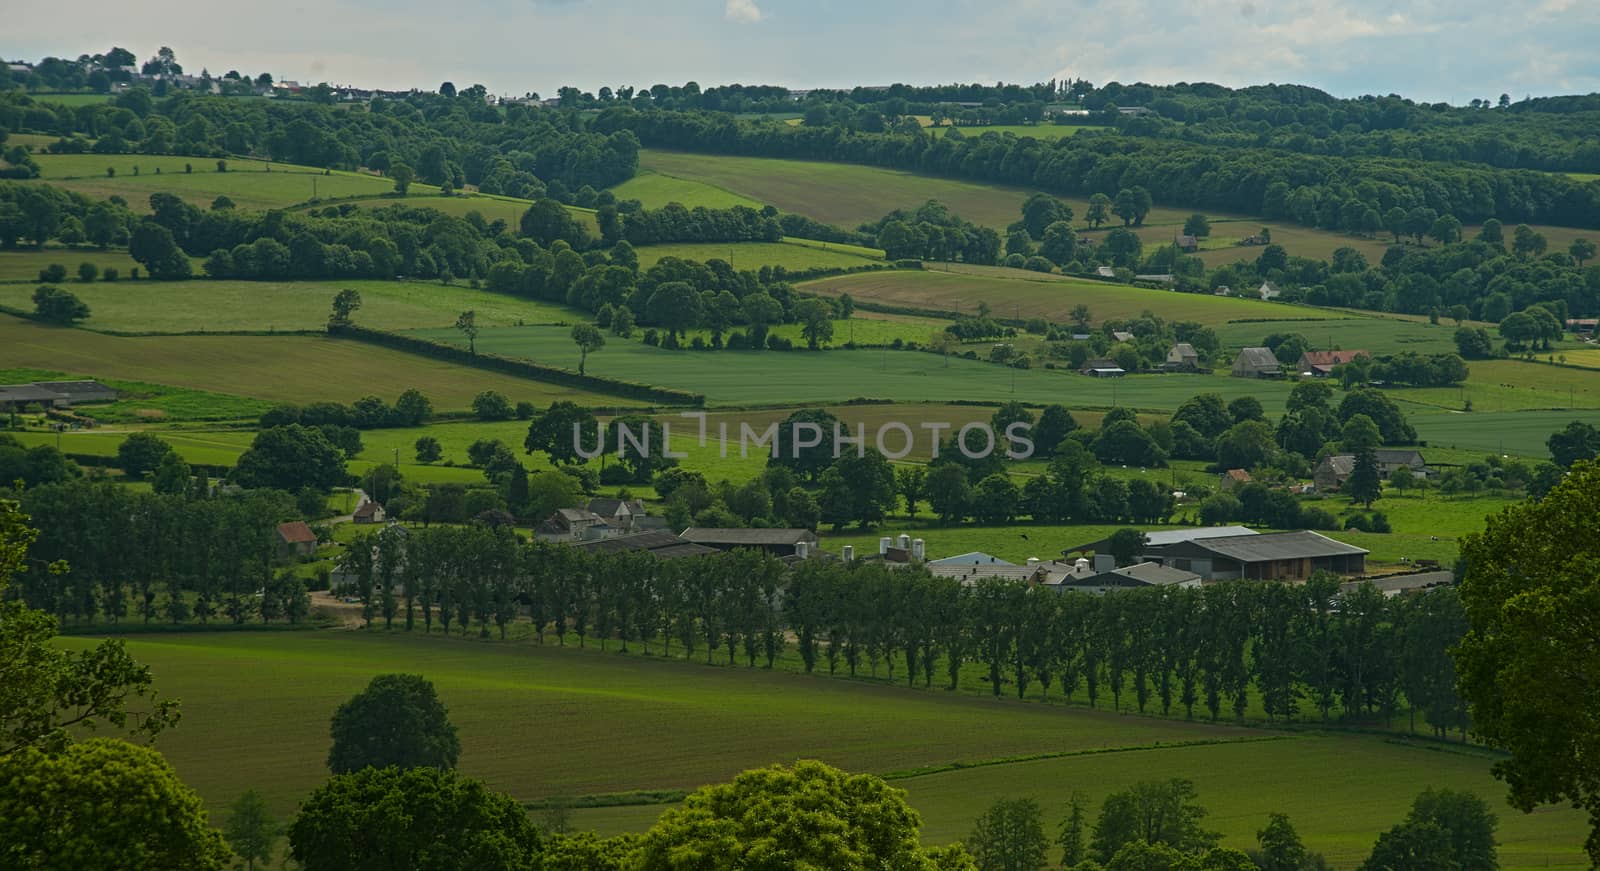 View from the hill on tranquil landscape in rural Normandy